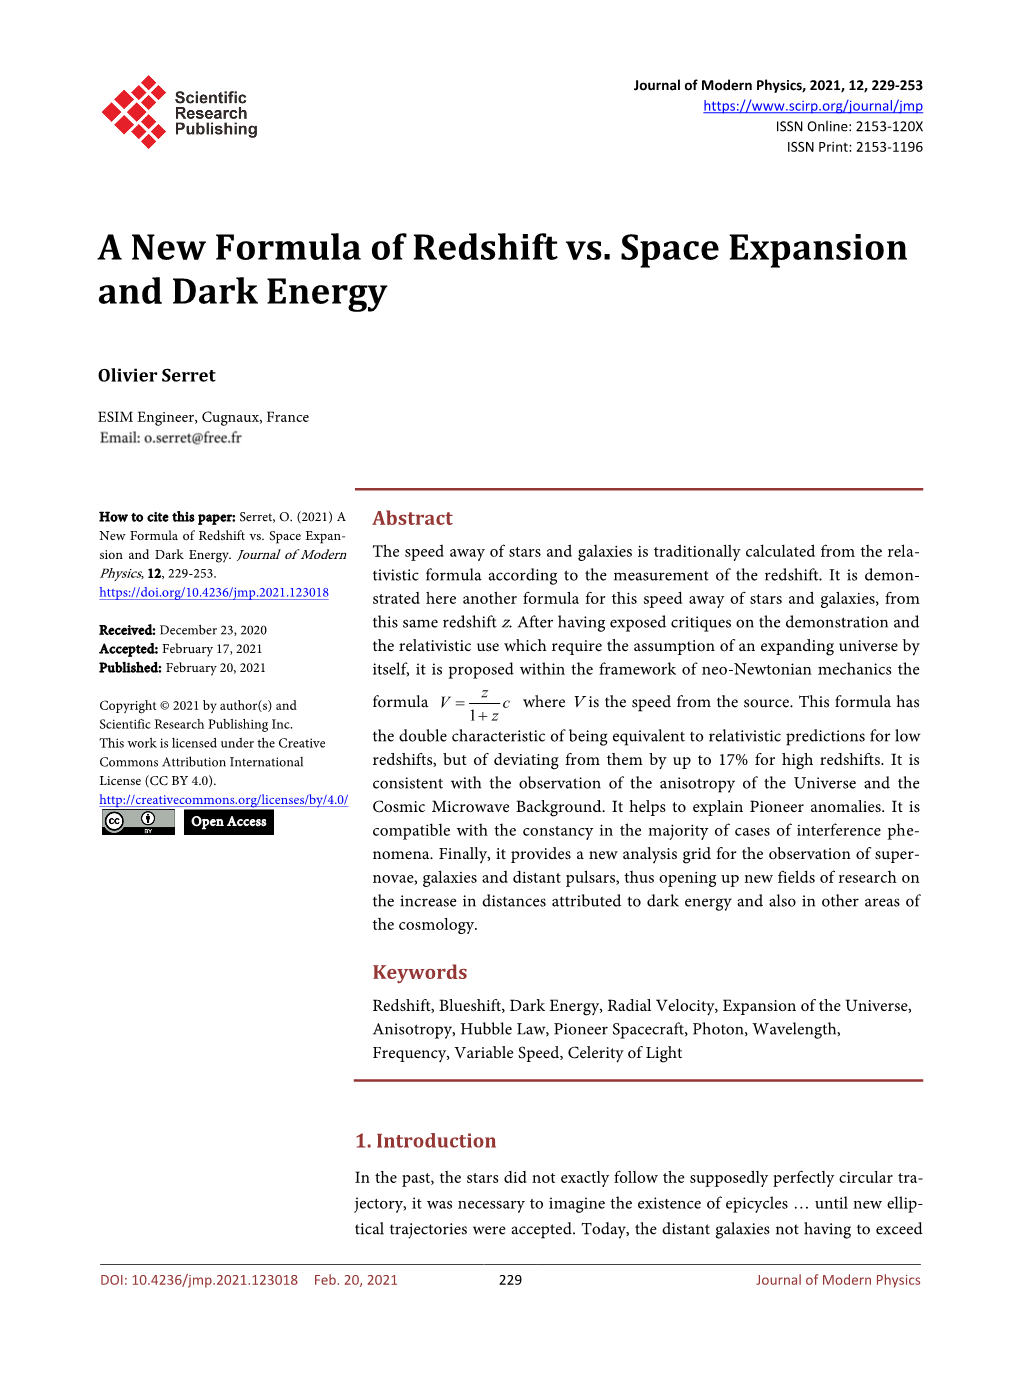 A New Formula of Redshift Vs. Space Expansion and Dark Energy